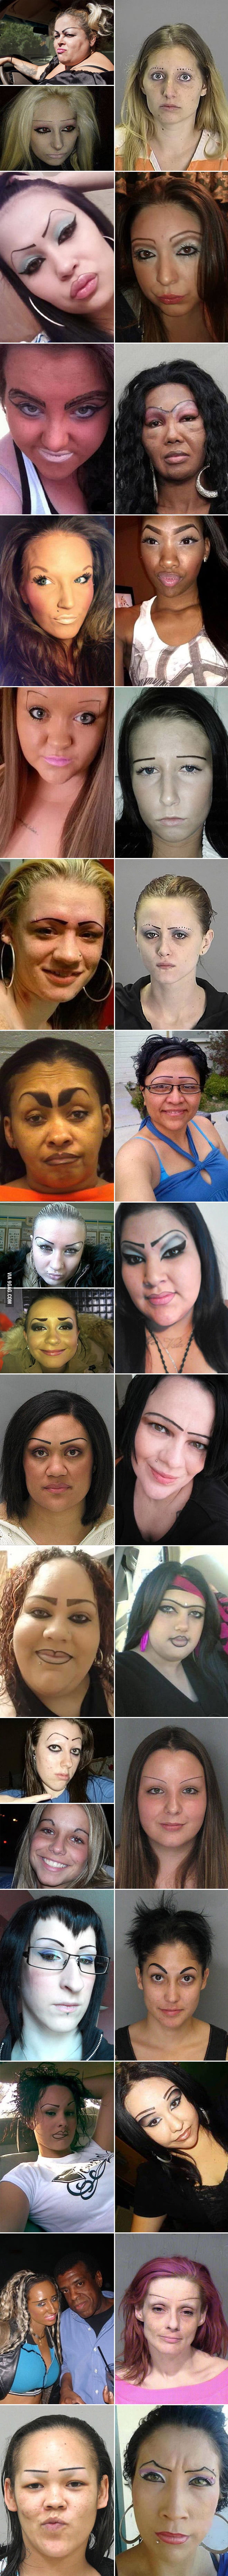 33 Women Who Don’t Understand Eyebrows